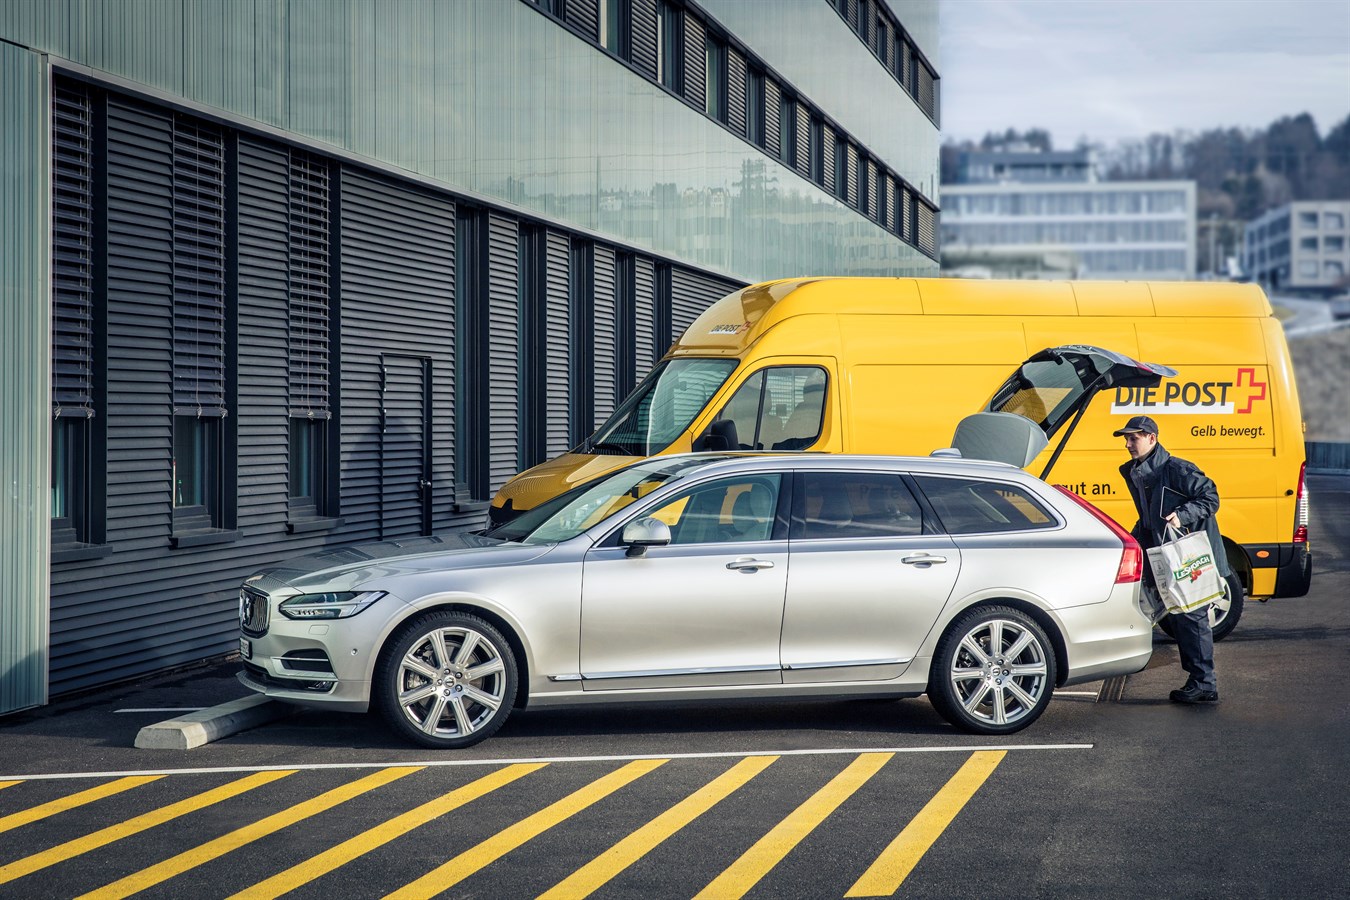 Volvo In-car Delivery, a Volvo Cars innovation